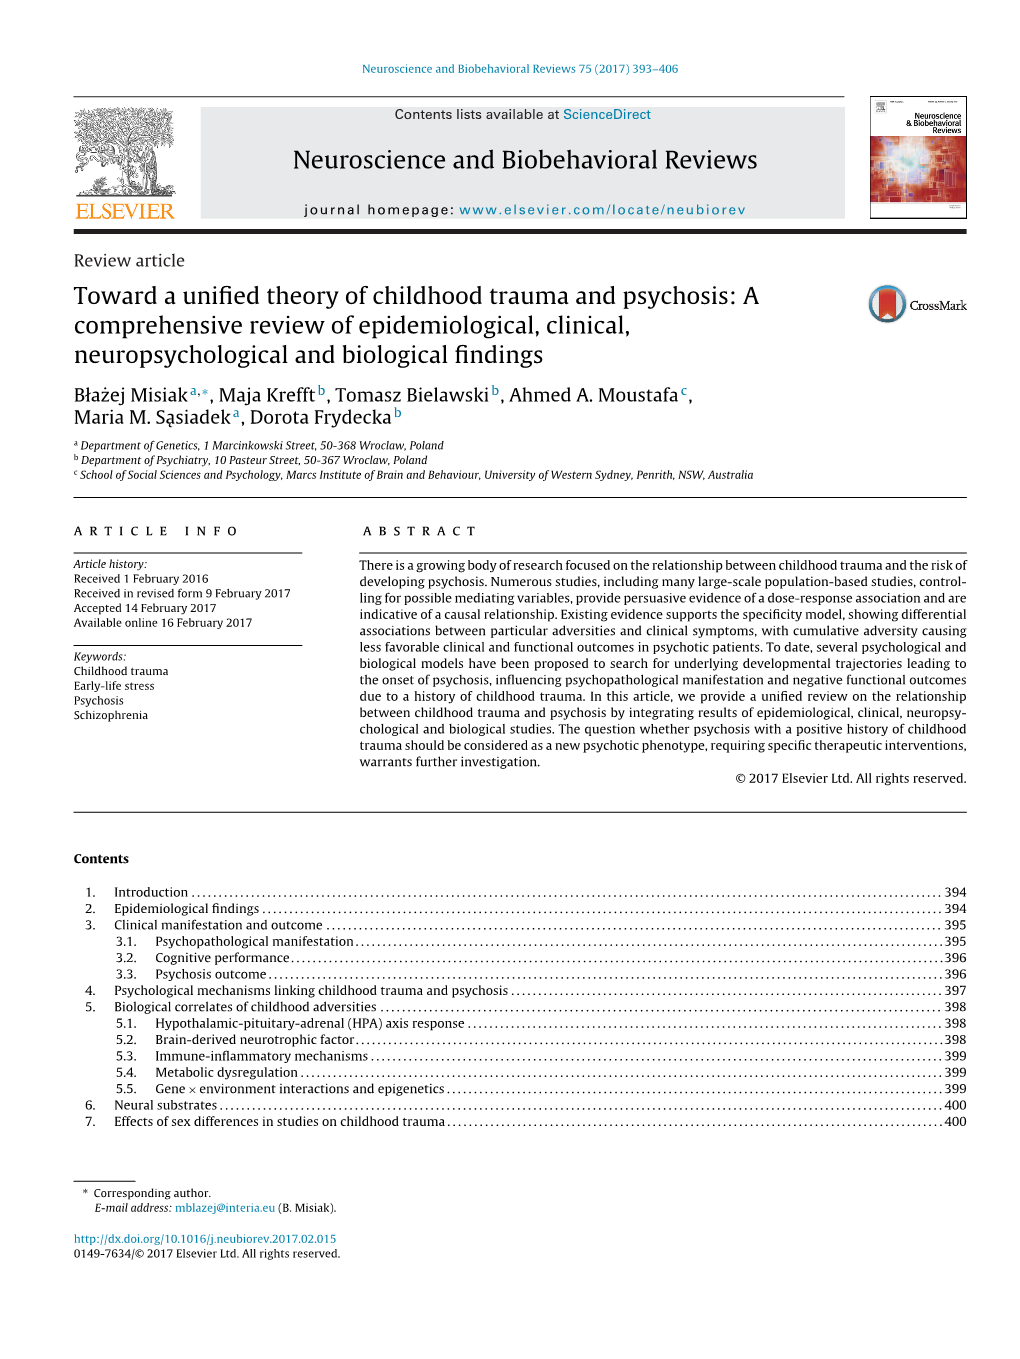 Toward a Unified Theory of Childhood Trauma and Psychosis